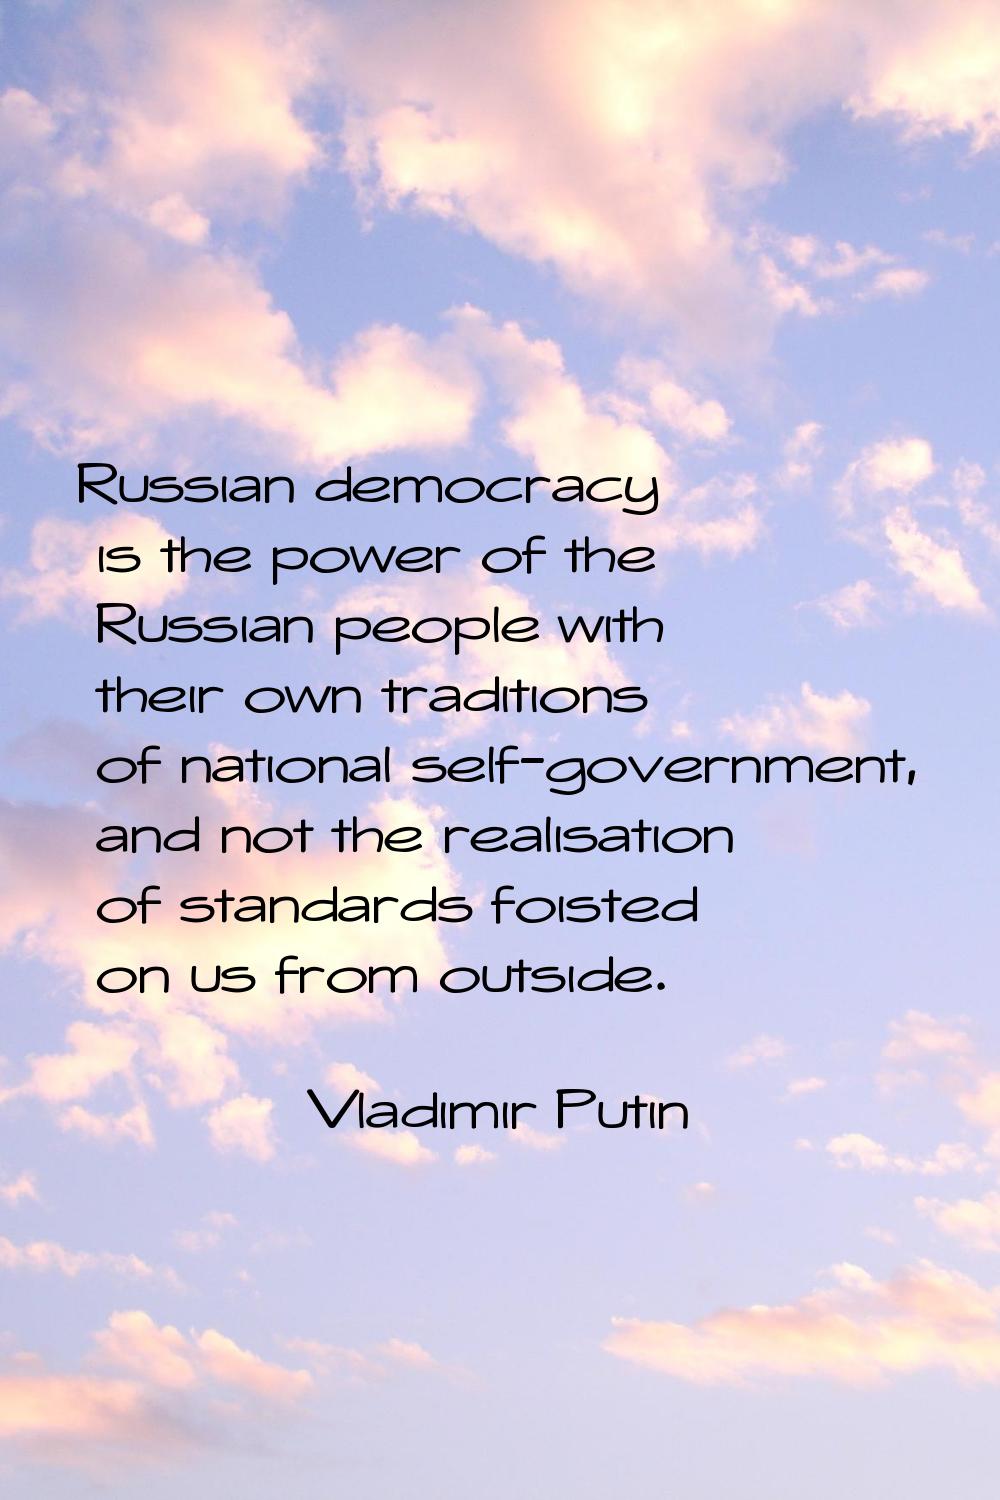 Russian democracy is the power of the Russian people with their own traditions of national self-gov